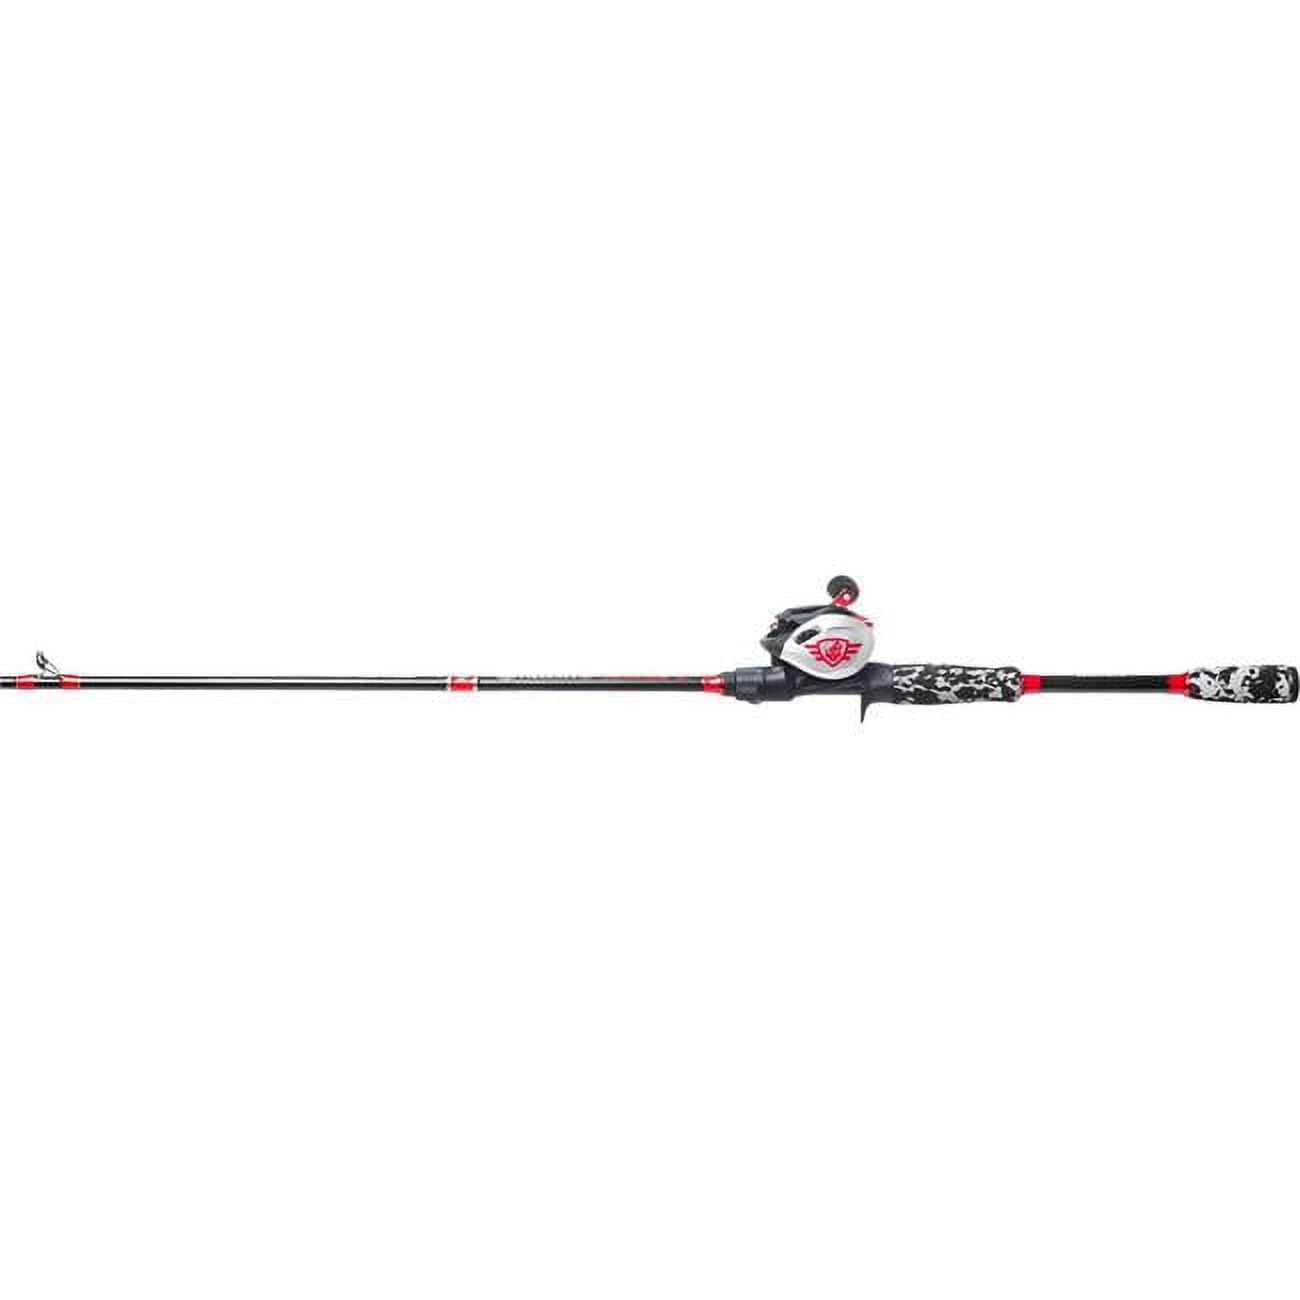 Favorite Fishing 7 ft. 2 Piece Army Right Hand Casting Rod & Reel